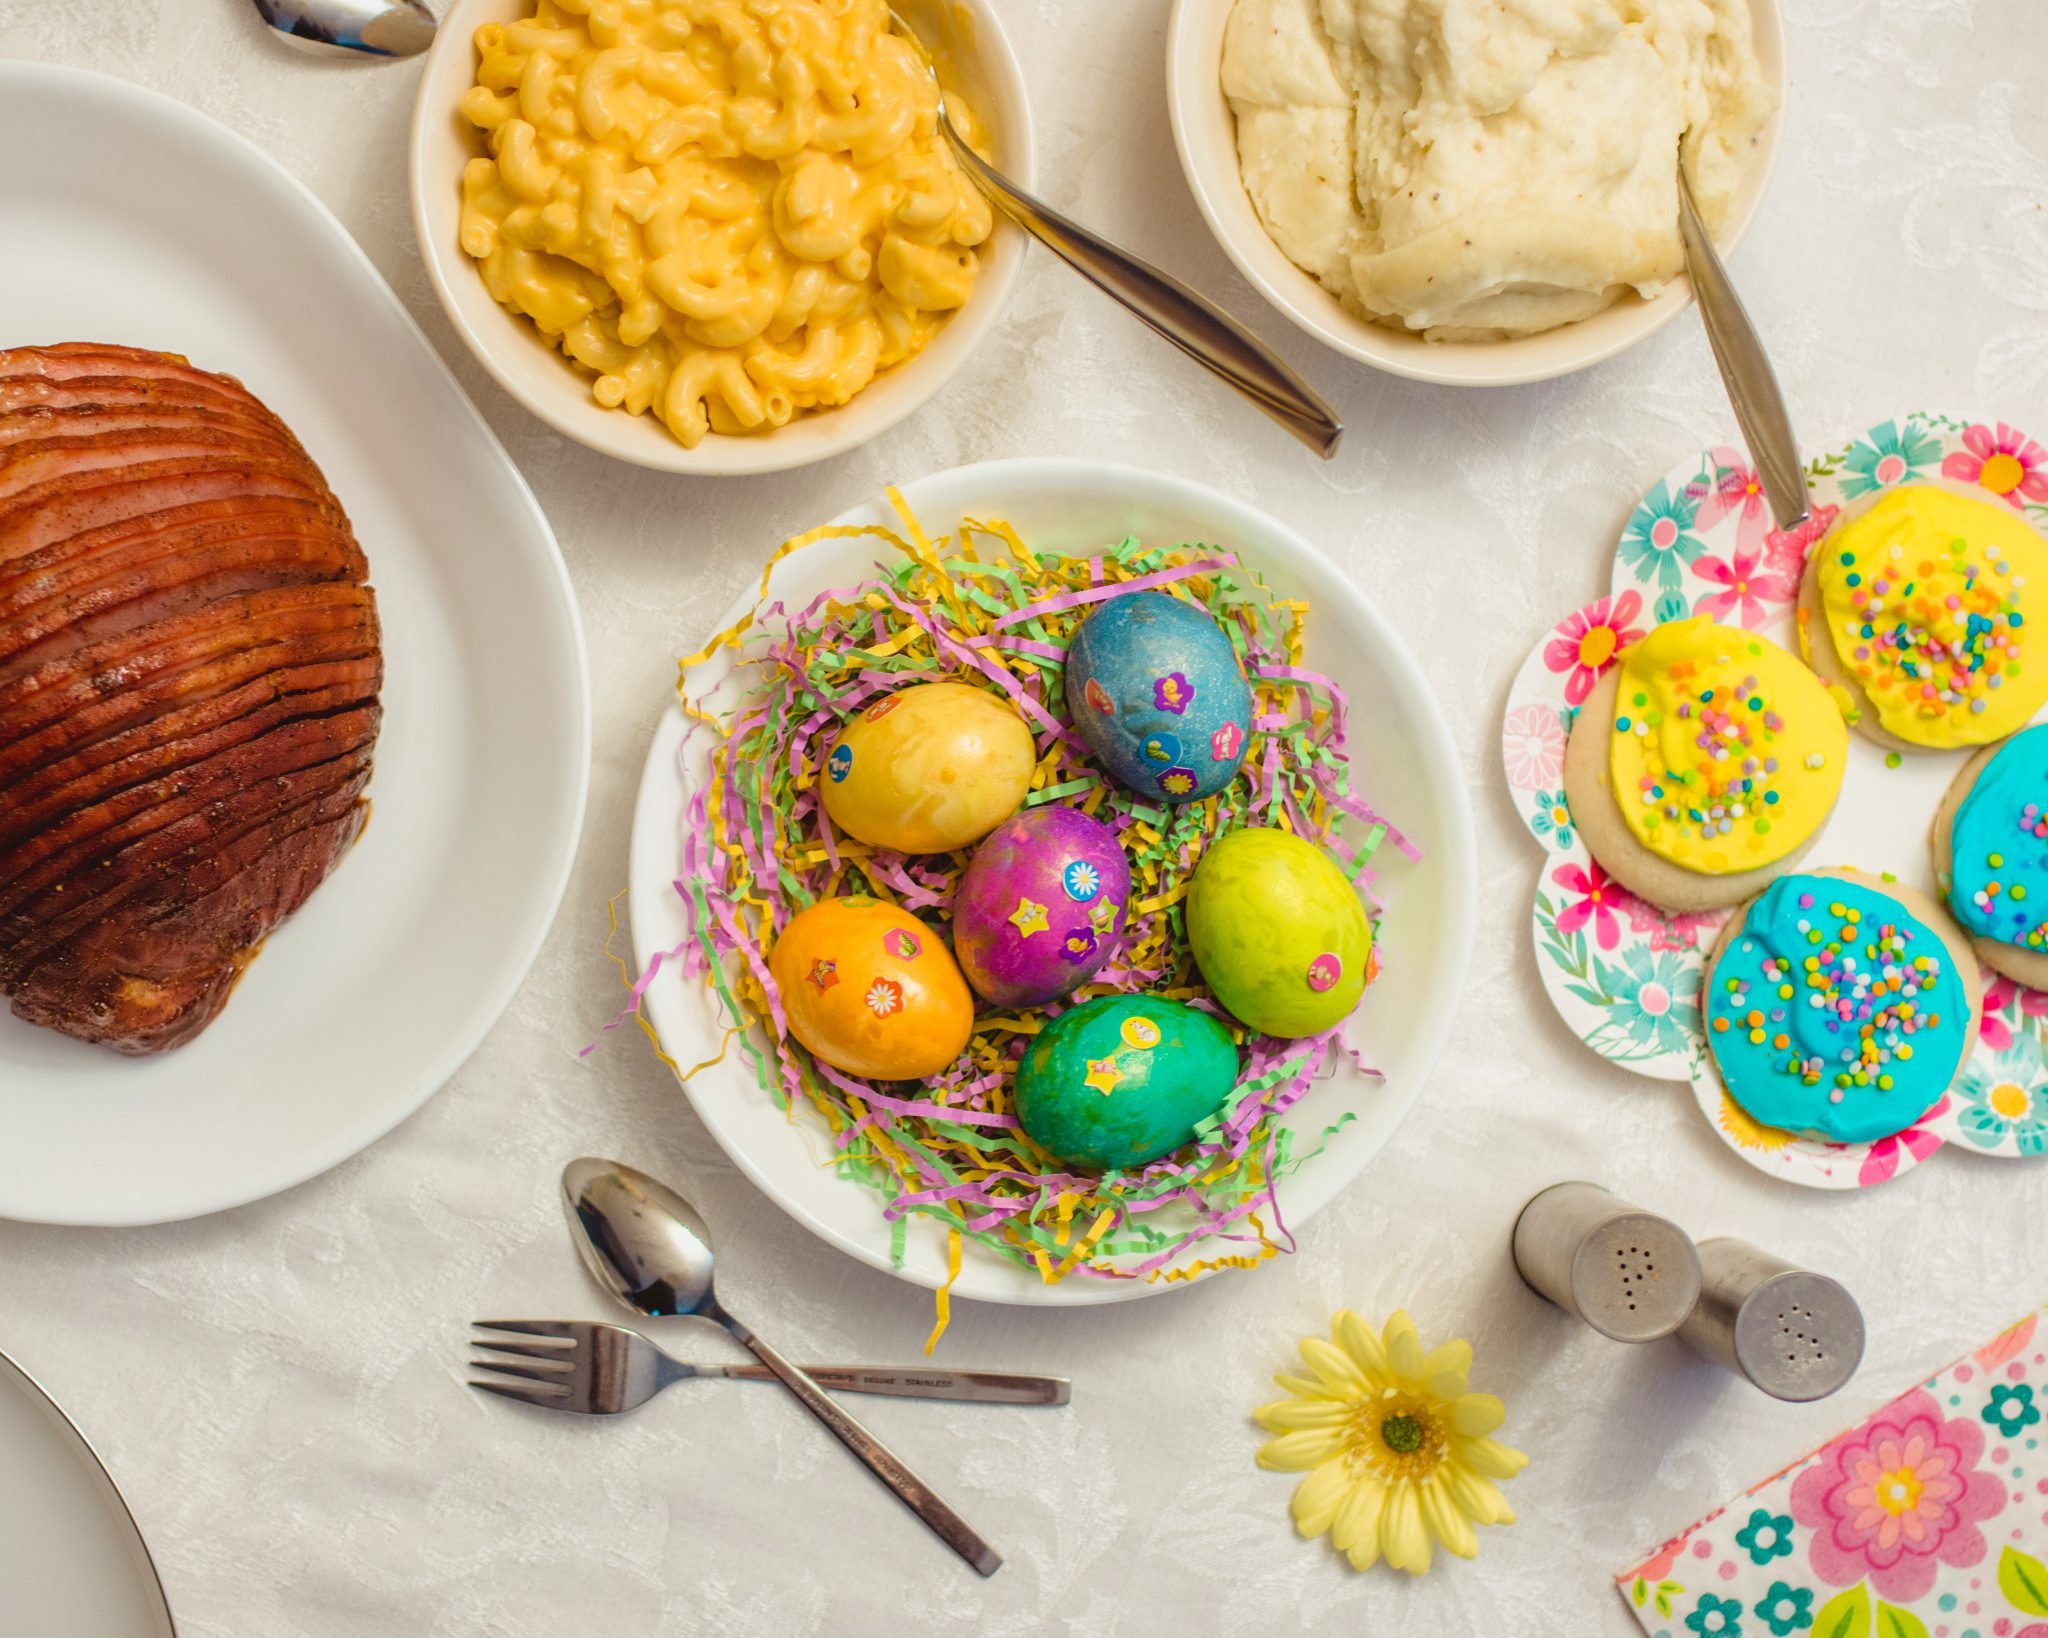 Flat lay of Easter eggs and brunch food